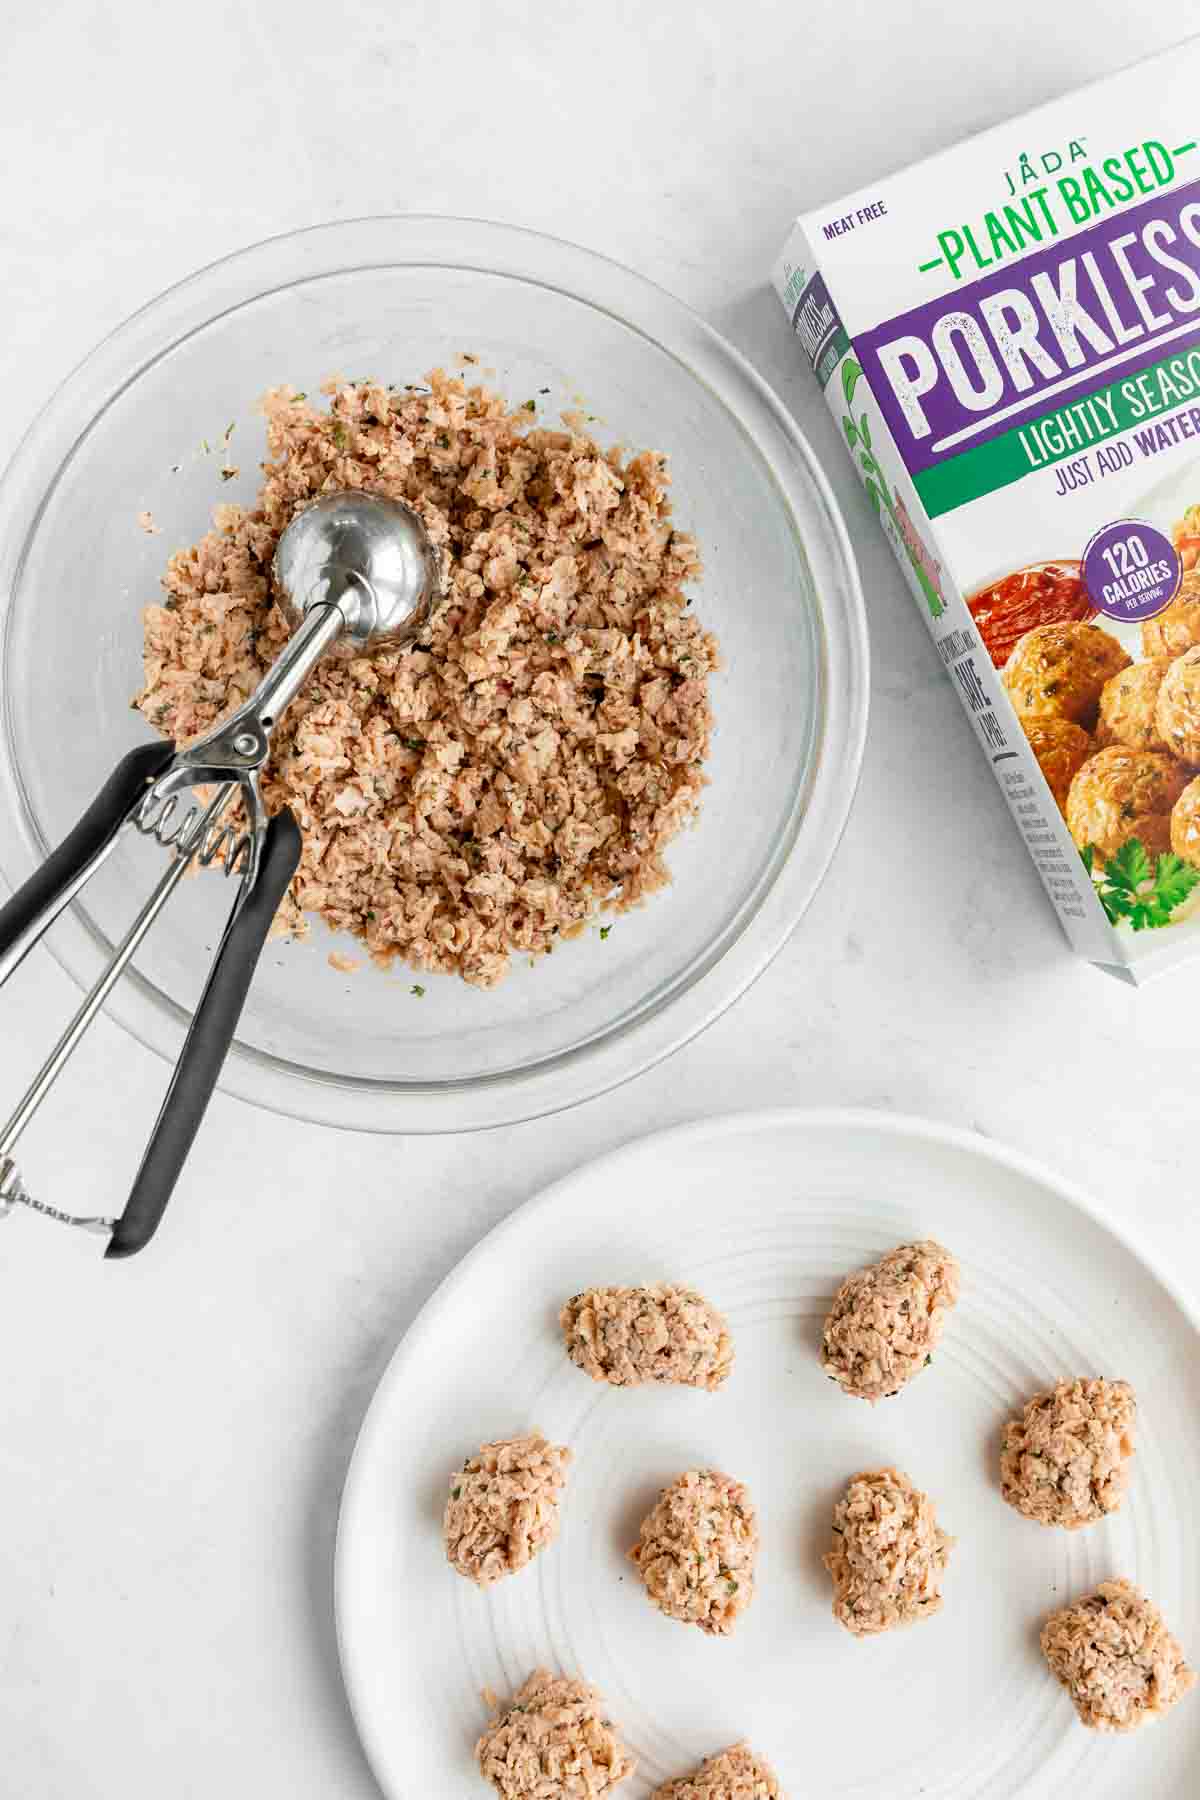 shaping jada brands porkless mix with a cookie scoop